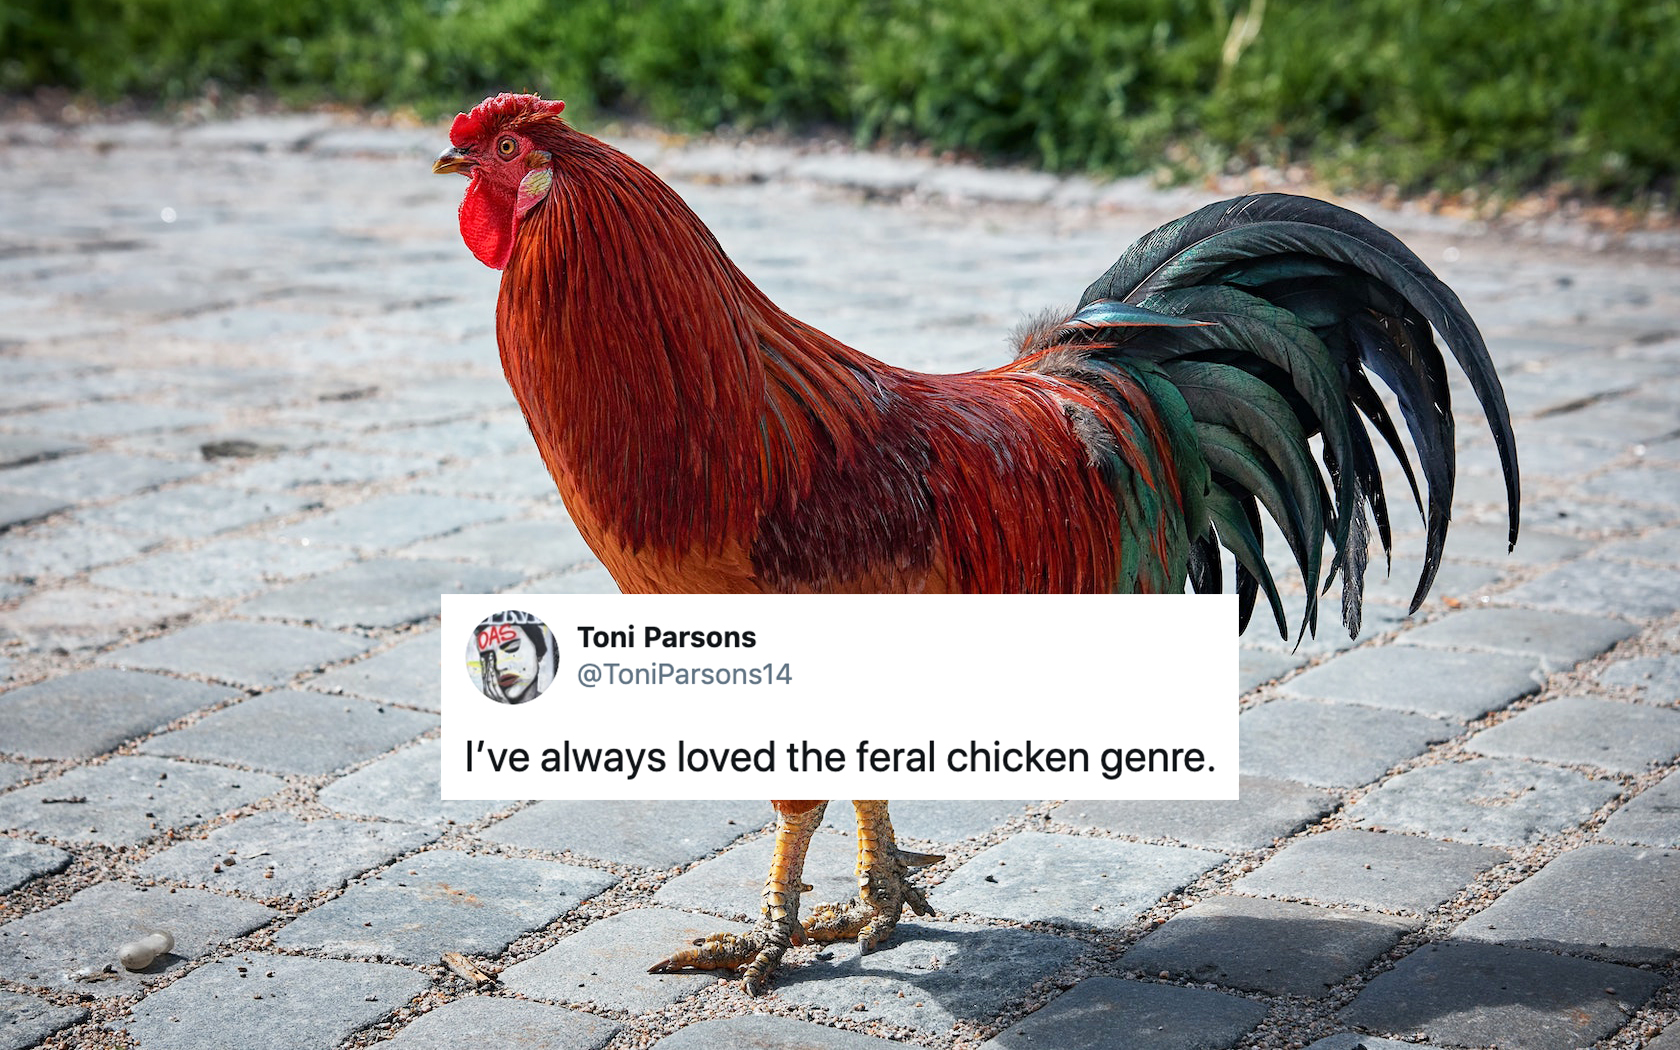 Feral Chickens Invaded A New Zealand Town As Locals Were In Lockdown